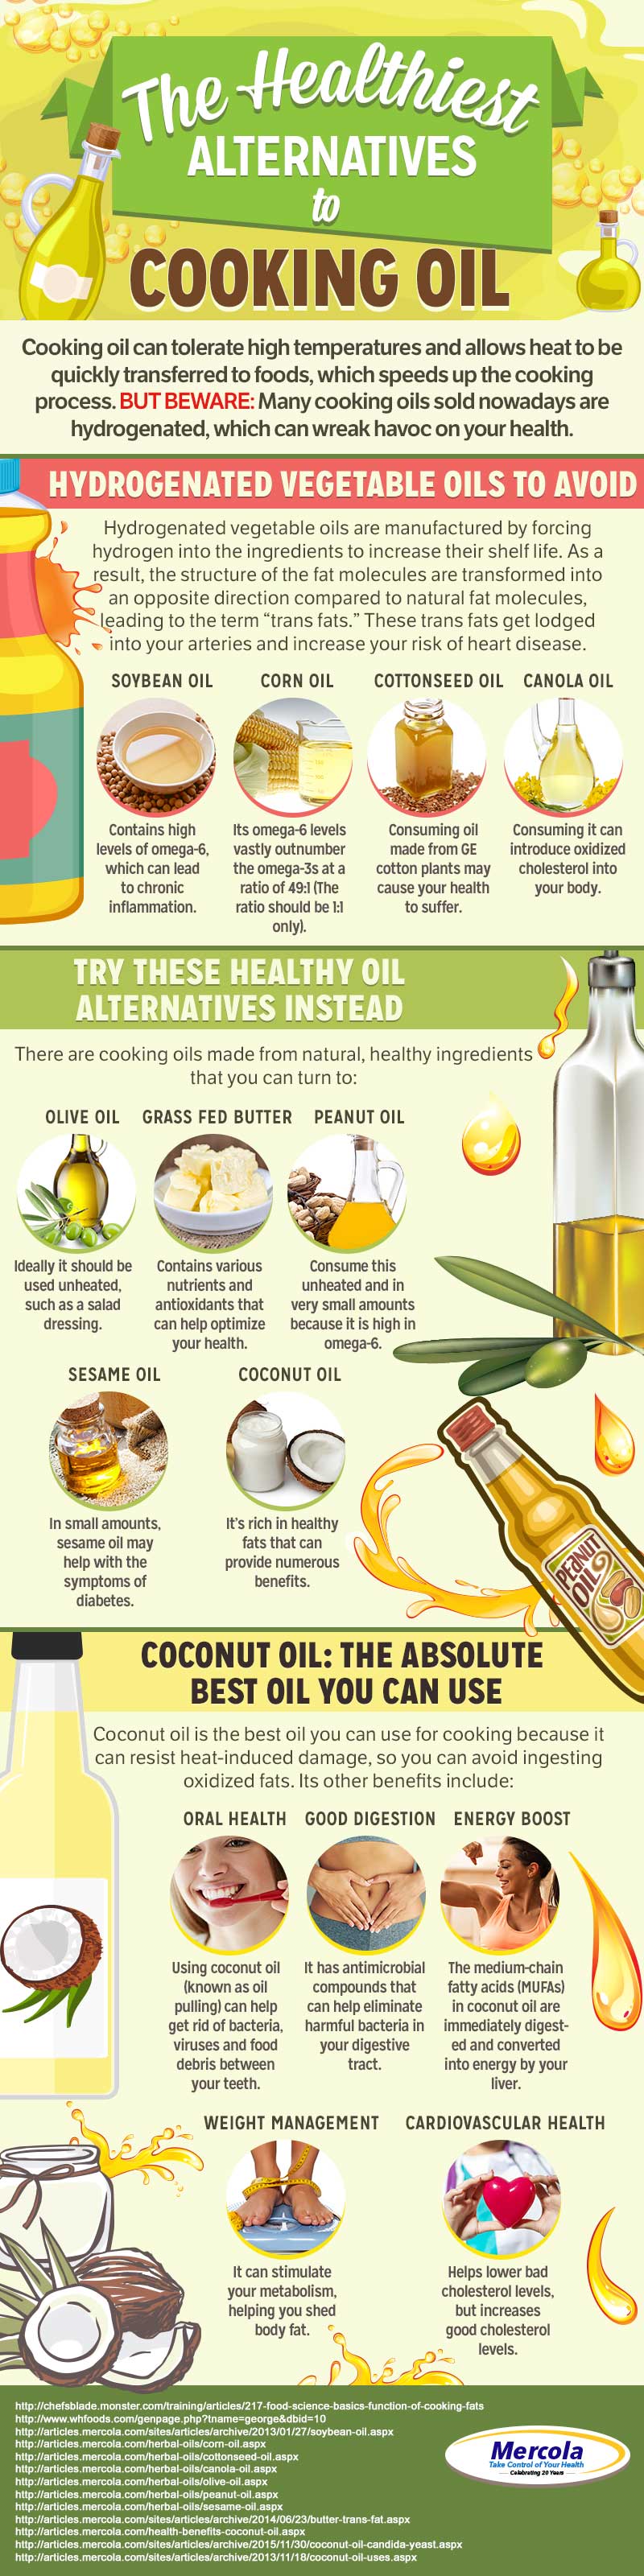 What Is the Healthiest Cooking Oil?